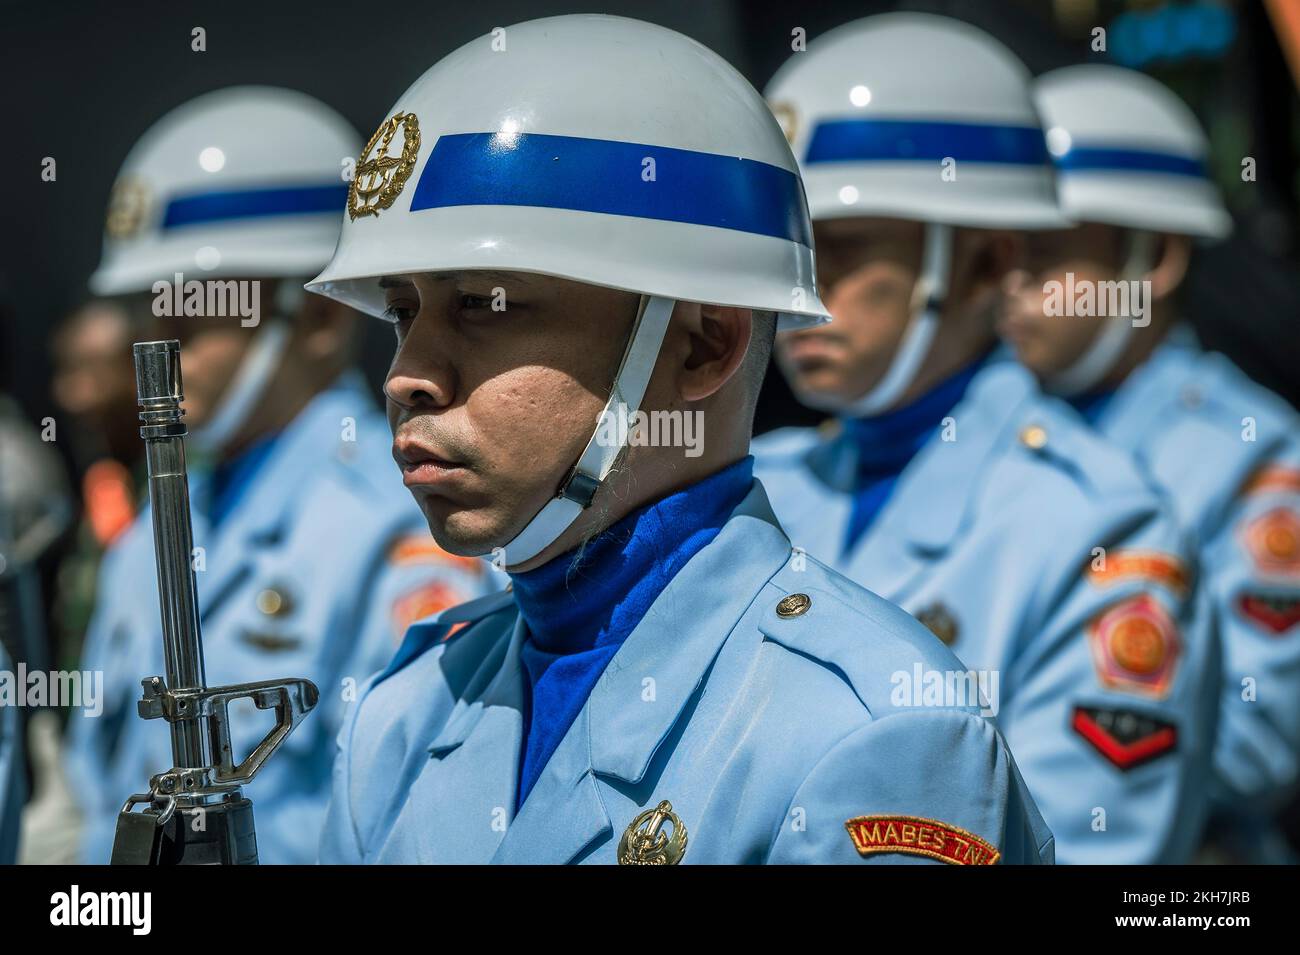 Jakarta, Indonesia. 21 November, 2022. Indonesian honor guards stand at attention during the arrival ceremony for U.S. Secretary of Defense Lloyd J. Austin III, at the Indonesian military headquarters, November 21, 2022 in Jakarta, Indonesia. Credit: Chad J. McNeeley/DOD/Alamy Live News Stock Photo